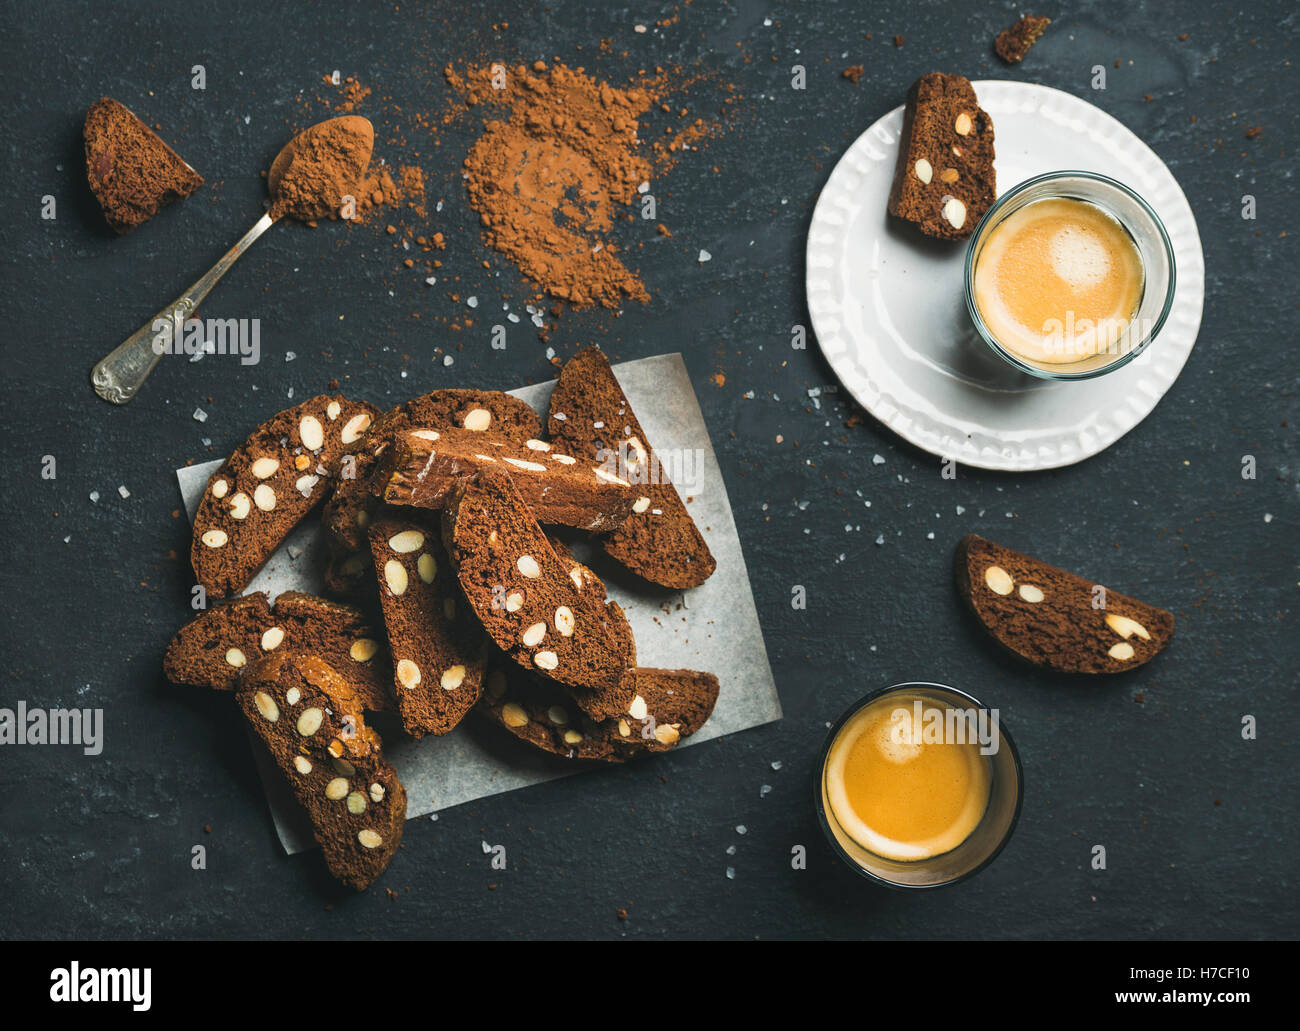 Dark chocolate and sea salt Biscotti with almonds and two glasses of coffee espresso over dark stone background, top view, selec Stock Photo